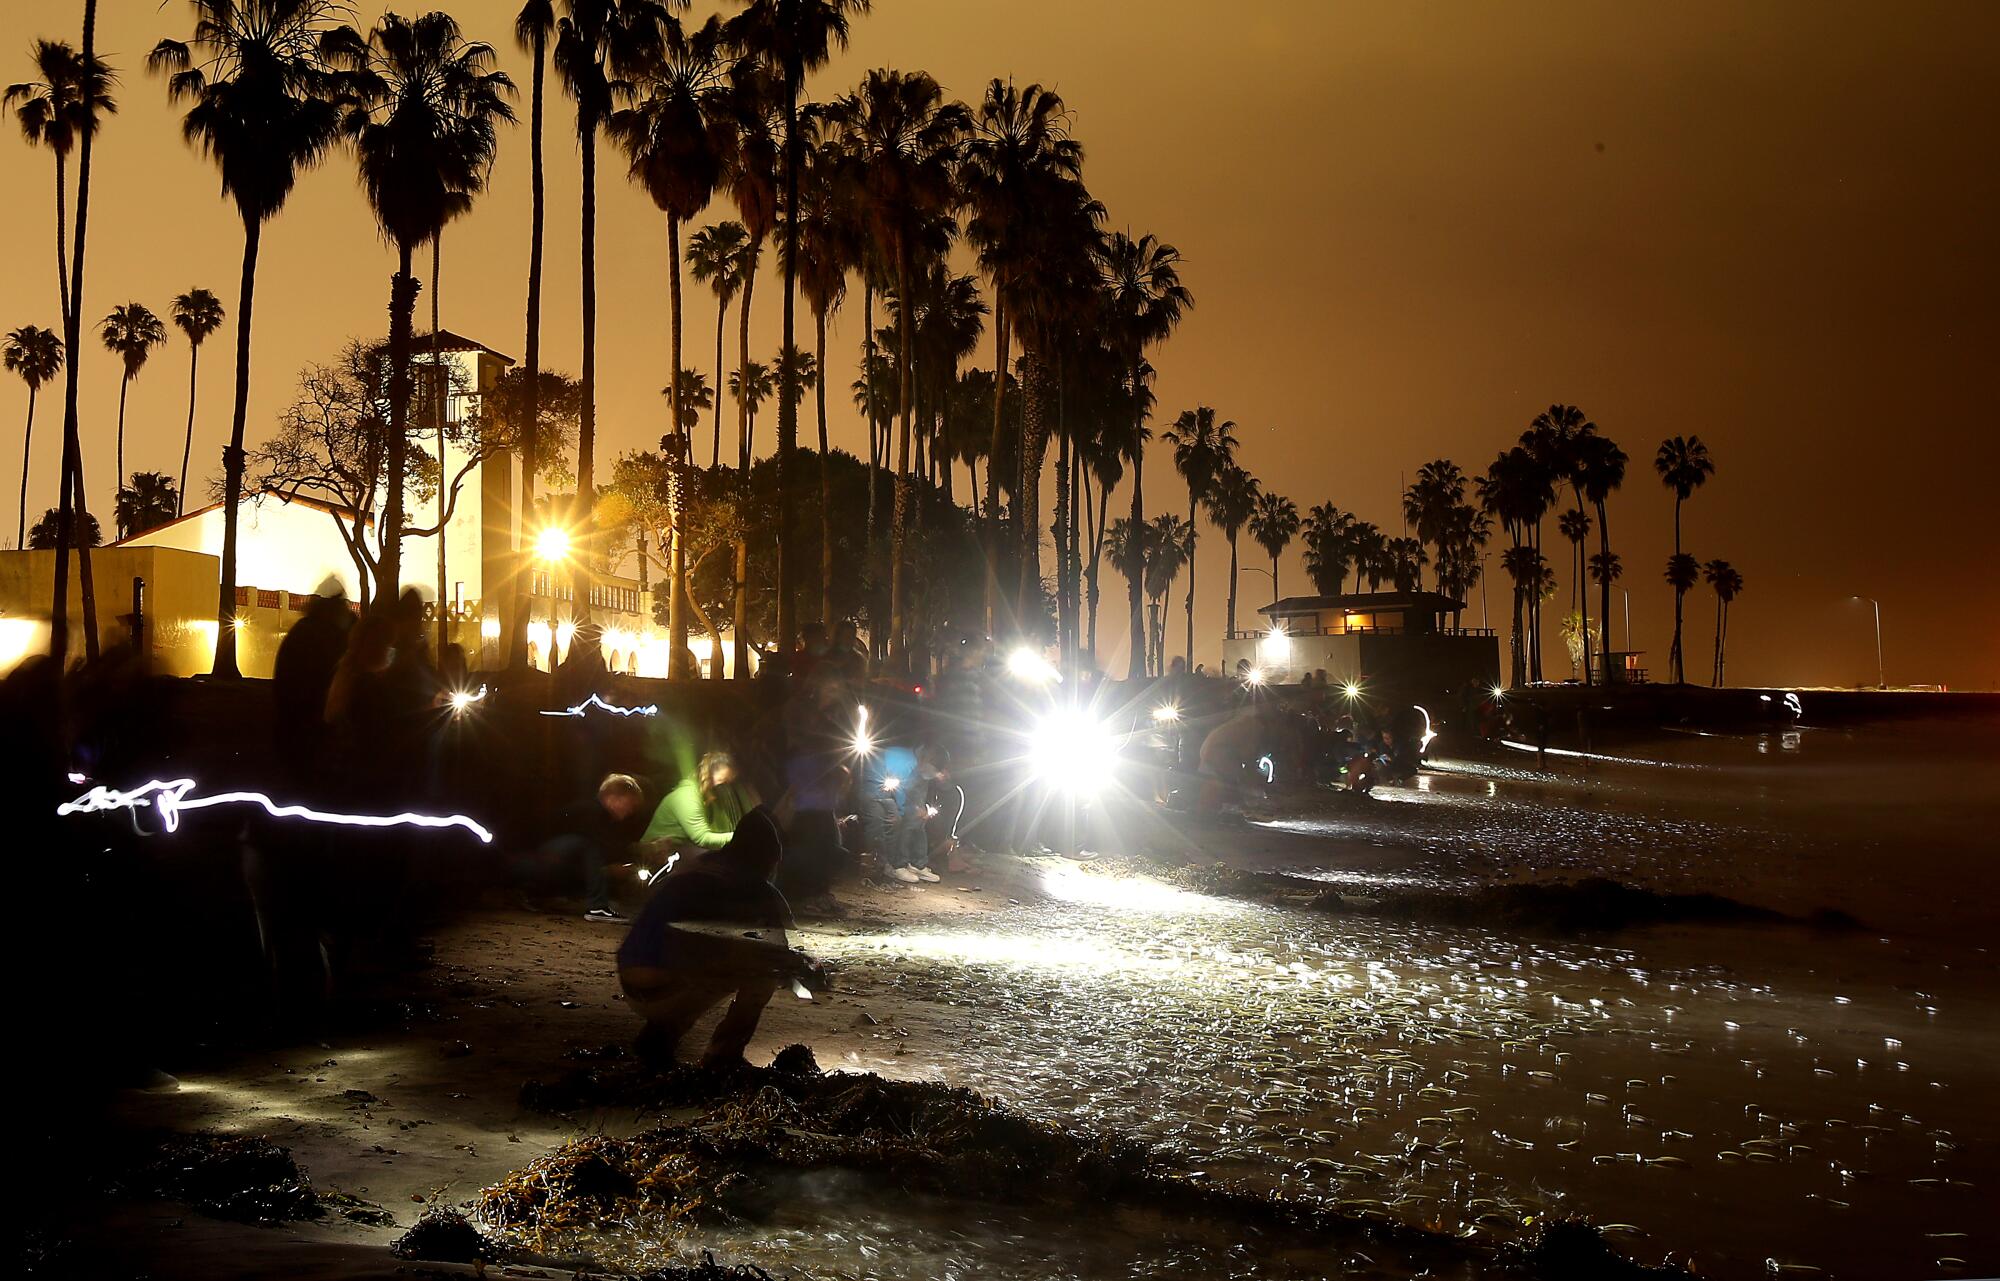 People shine flashlights on masses of grunion at the beach.